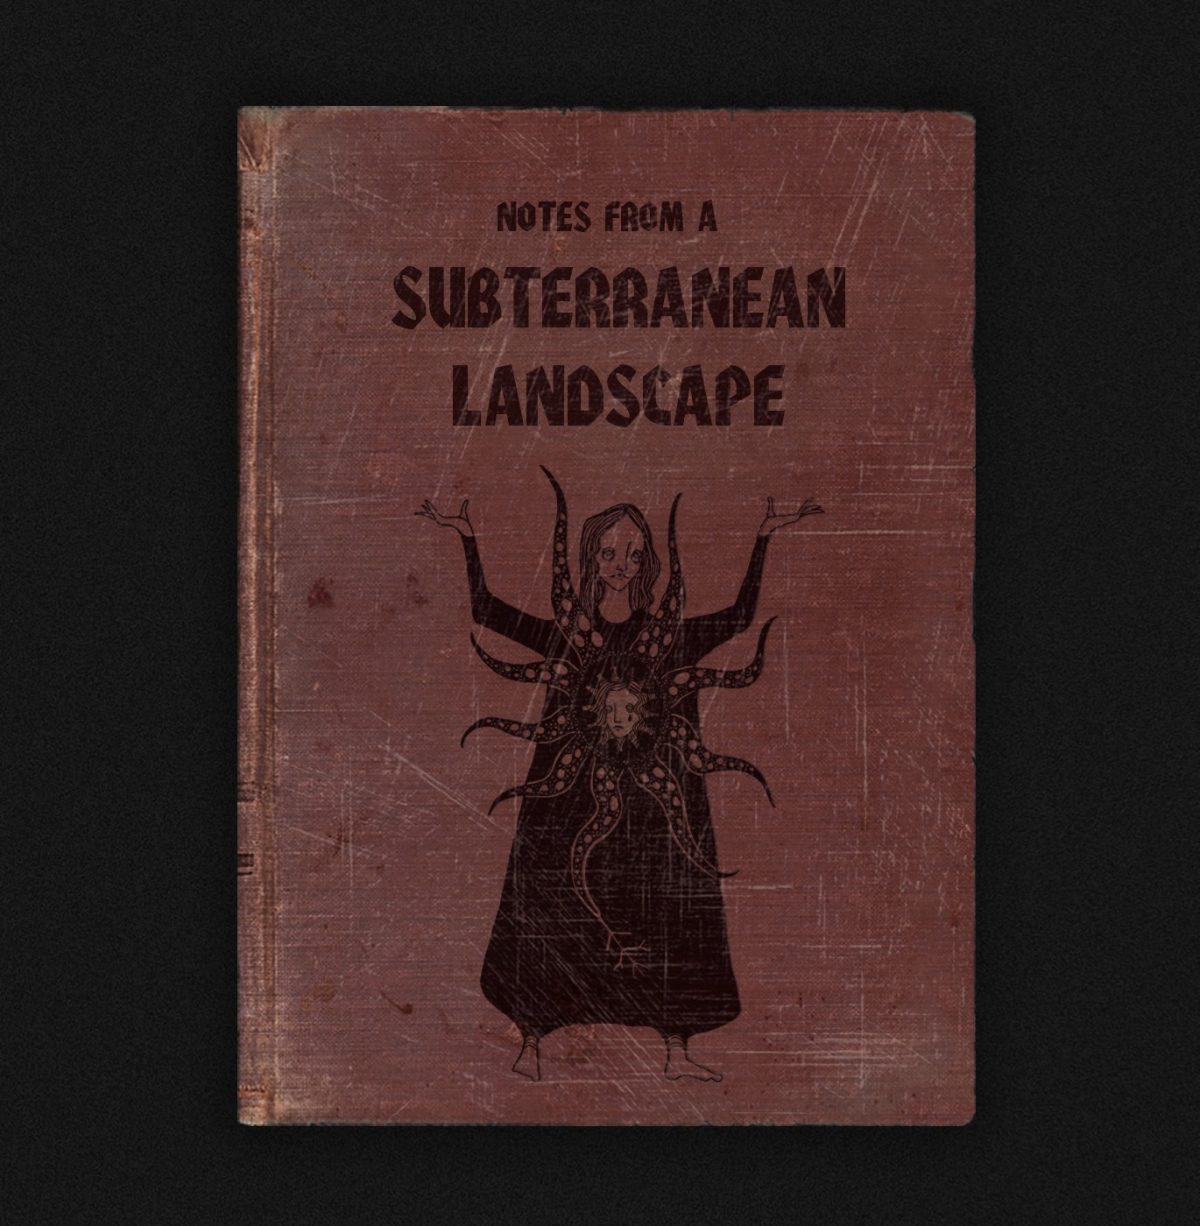 Notes from a Subterreanean Landscape